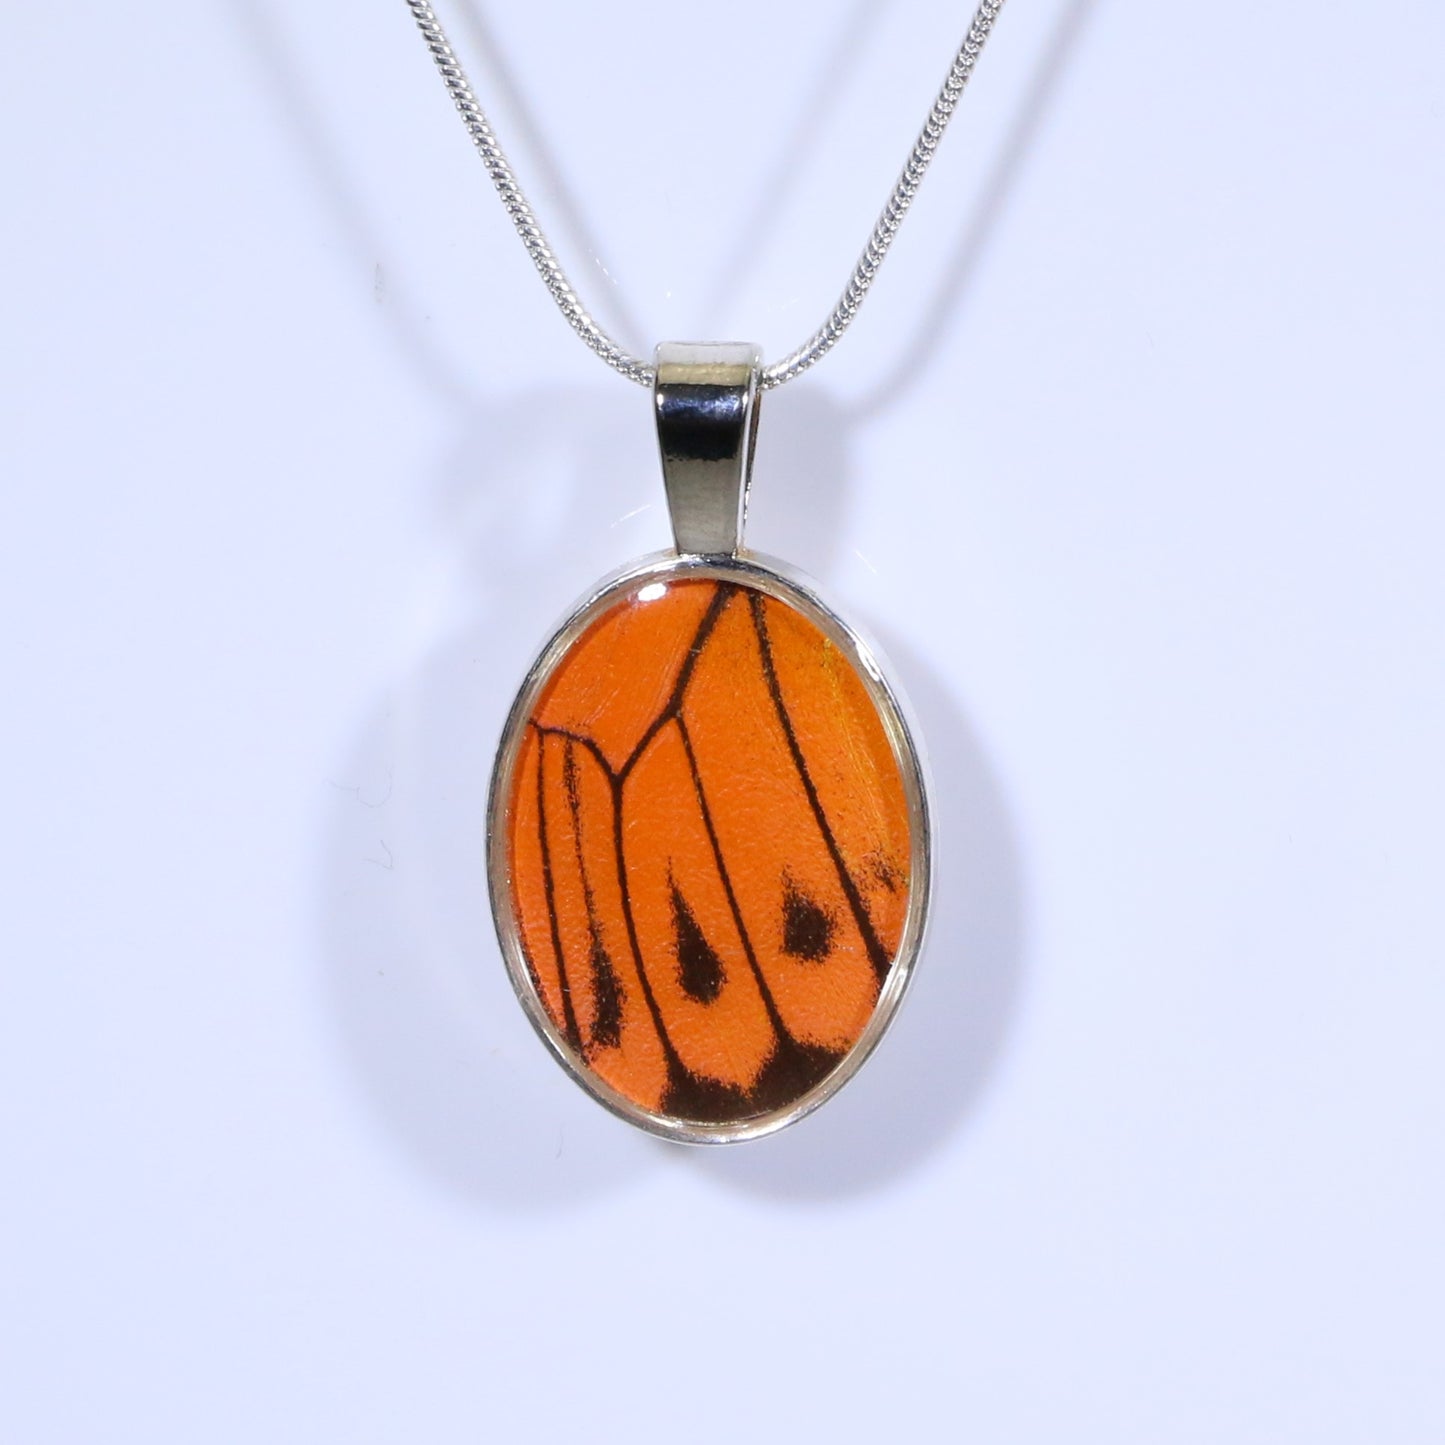 52315 - Real Butterfly Wing Jewelry - Pendant - Large Bale - Oval - Hebomia - Orange